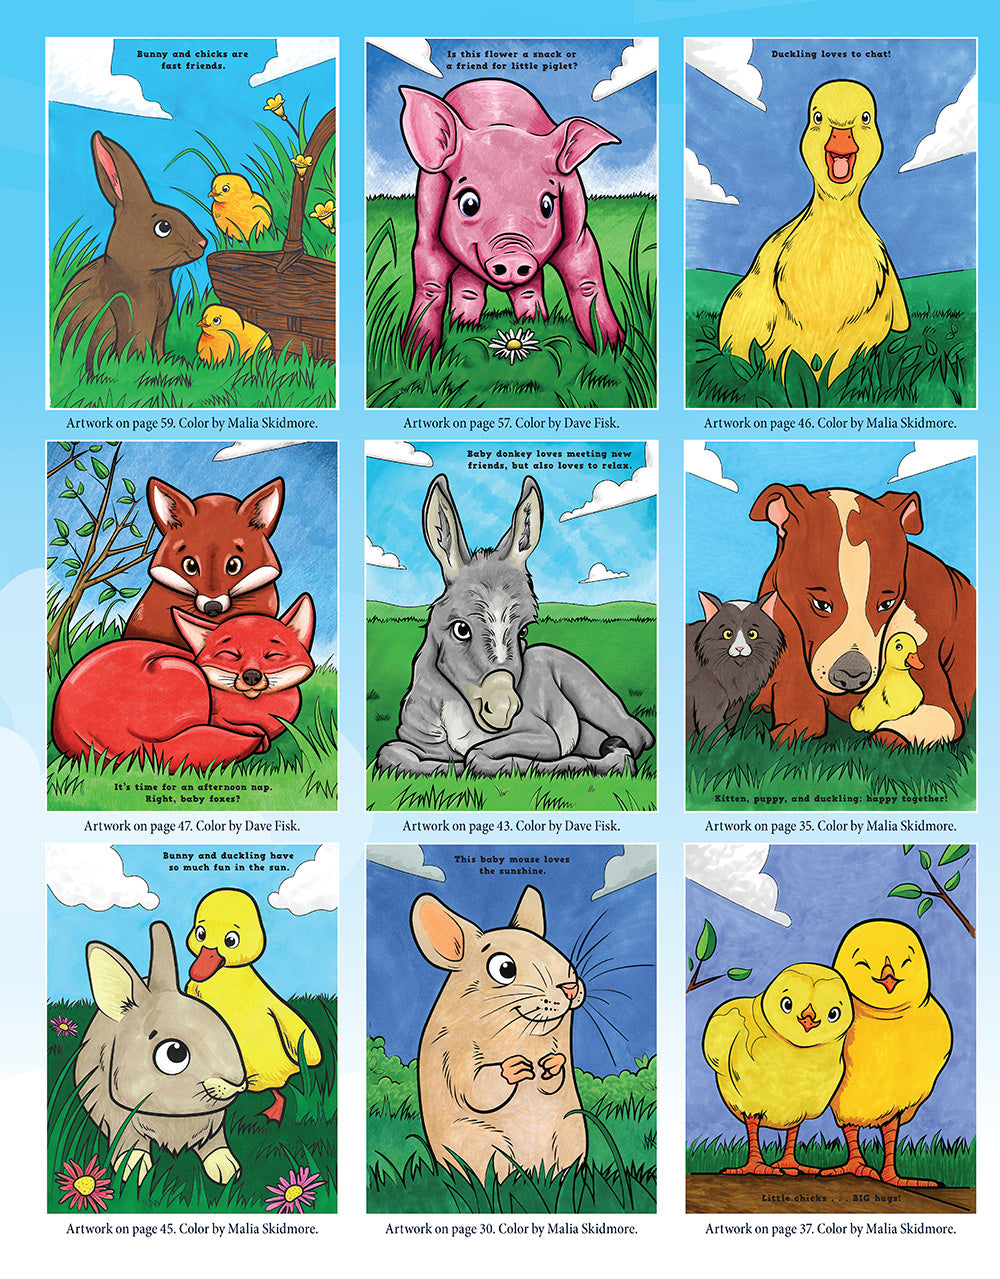 Bunnies, Ducks and Baby Animals Coloring Book